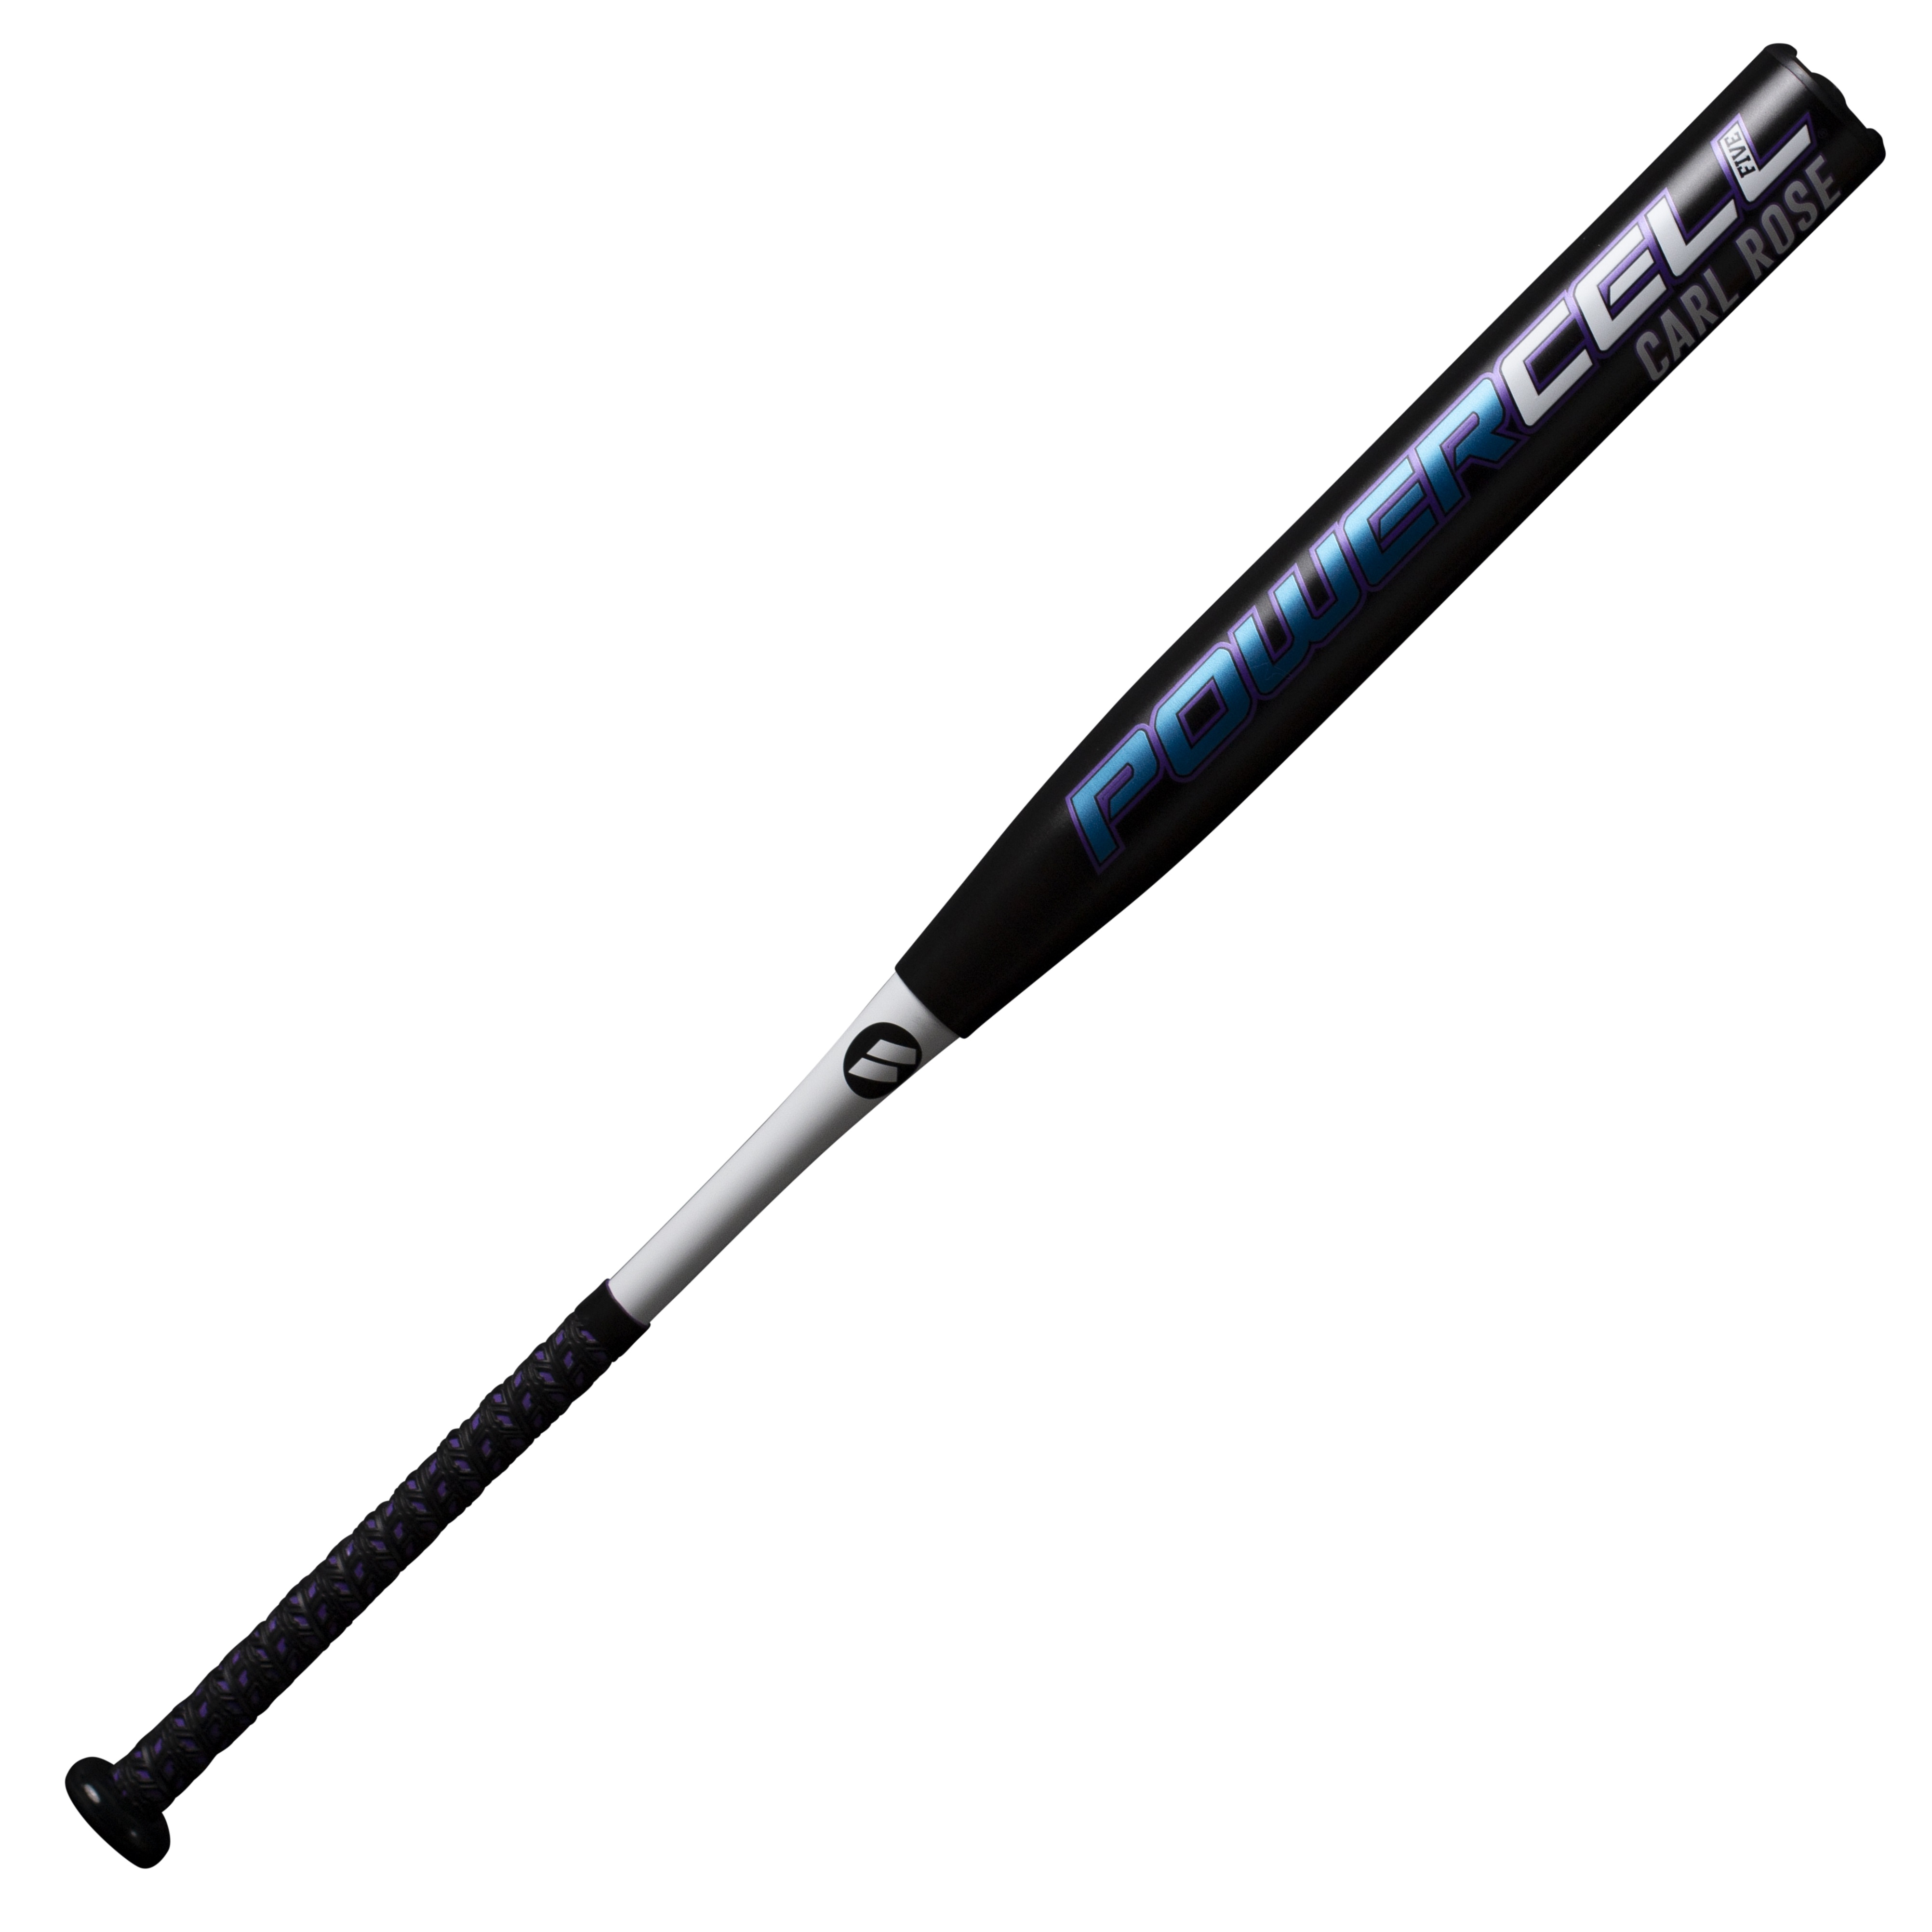 worth-carl-rose-powercell-slowpitch-softball-bat-13-5-usssa-34-inch-26-oz WCARLU-3-26 Worth 043365360921 <p>Worth Softball Bat honoring Carl Rose. The 2021 Worth Slow pitch